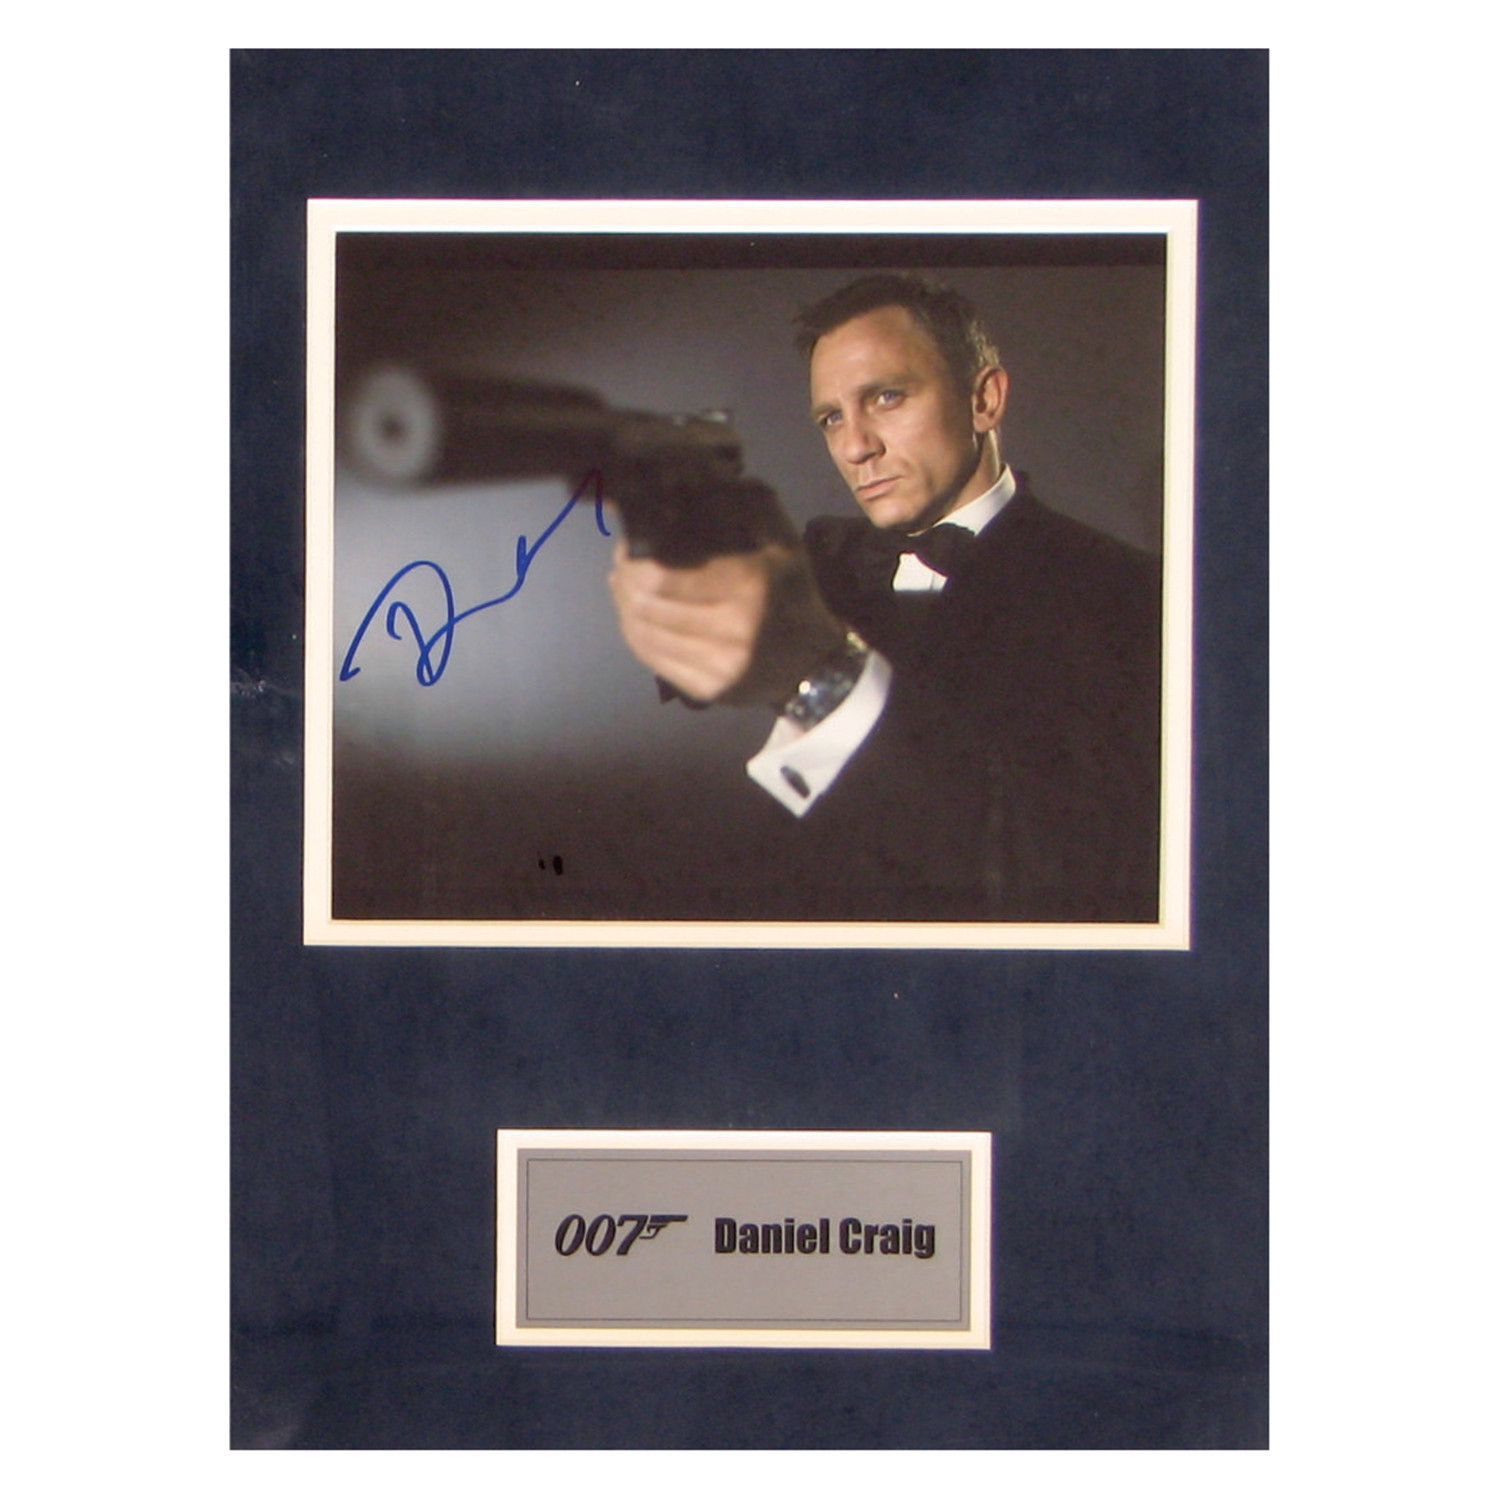 Daniel Craig // 007 // Signed Photo - Piece Of The Past - Touch of Modern